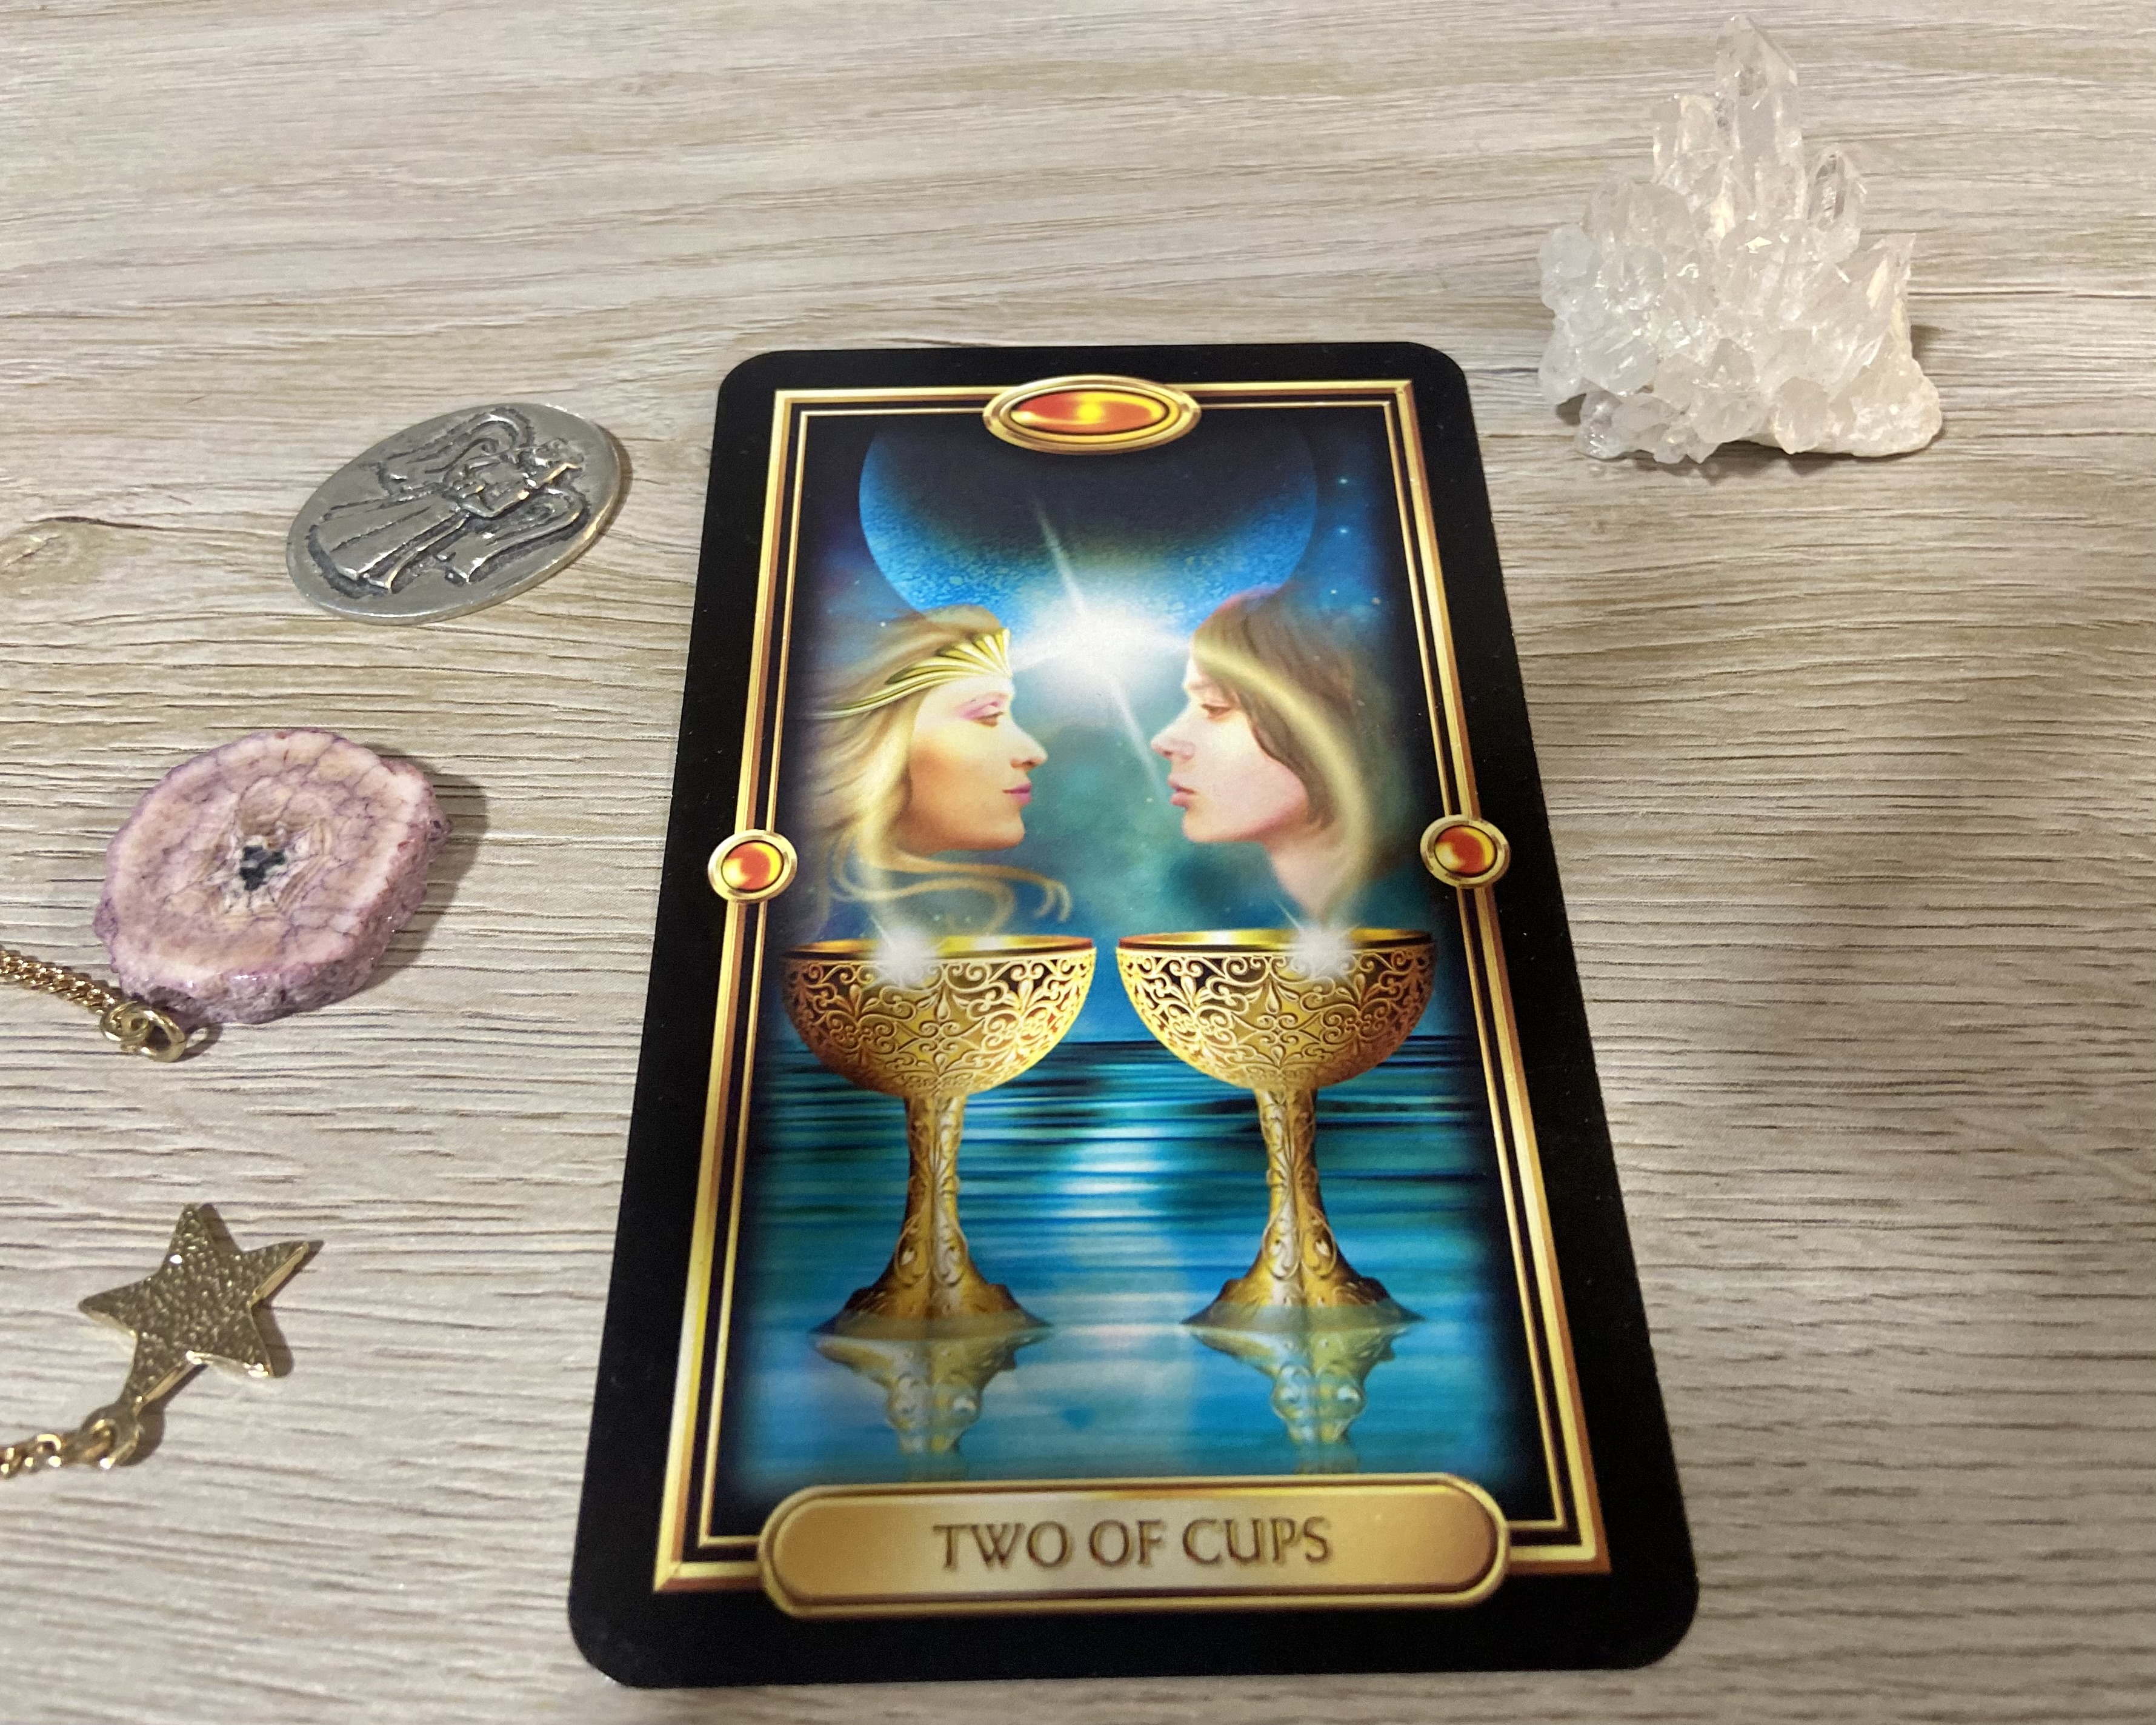 2 of cups marriage